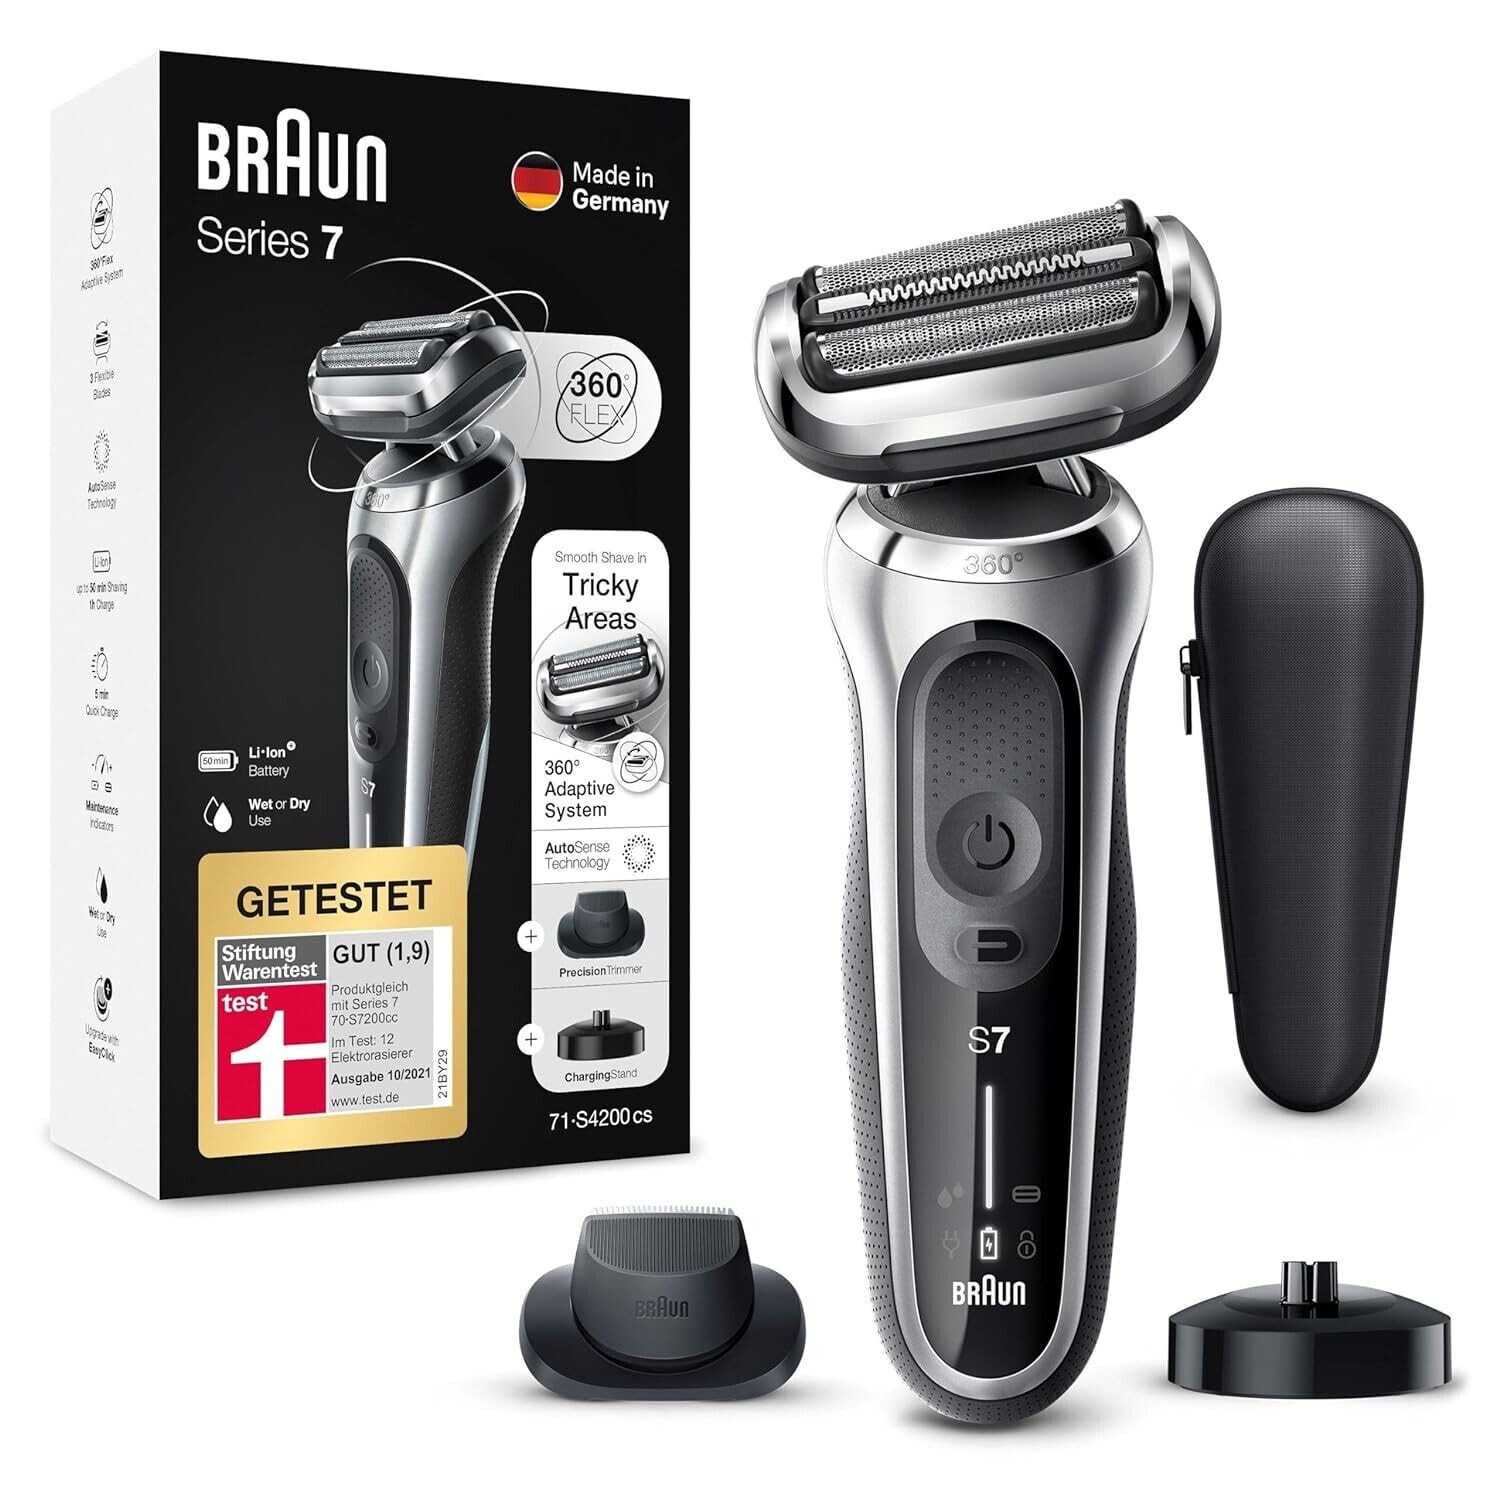 Braun Series 8 Men's Razor with 4+1 Shaving Head, Electric Shaver, Precision Long Hair Trimmer, Charging Station, 60 Minutes Running Time, Wet & Dry, Made in Germany, Valentine's Day Gift for Him,